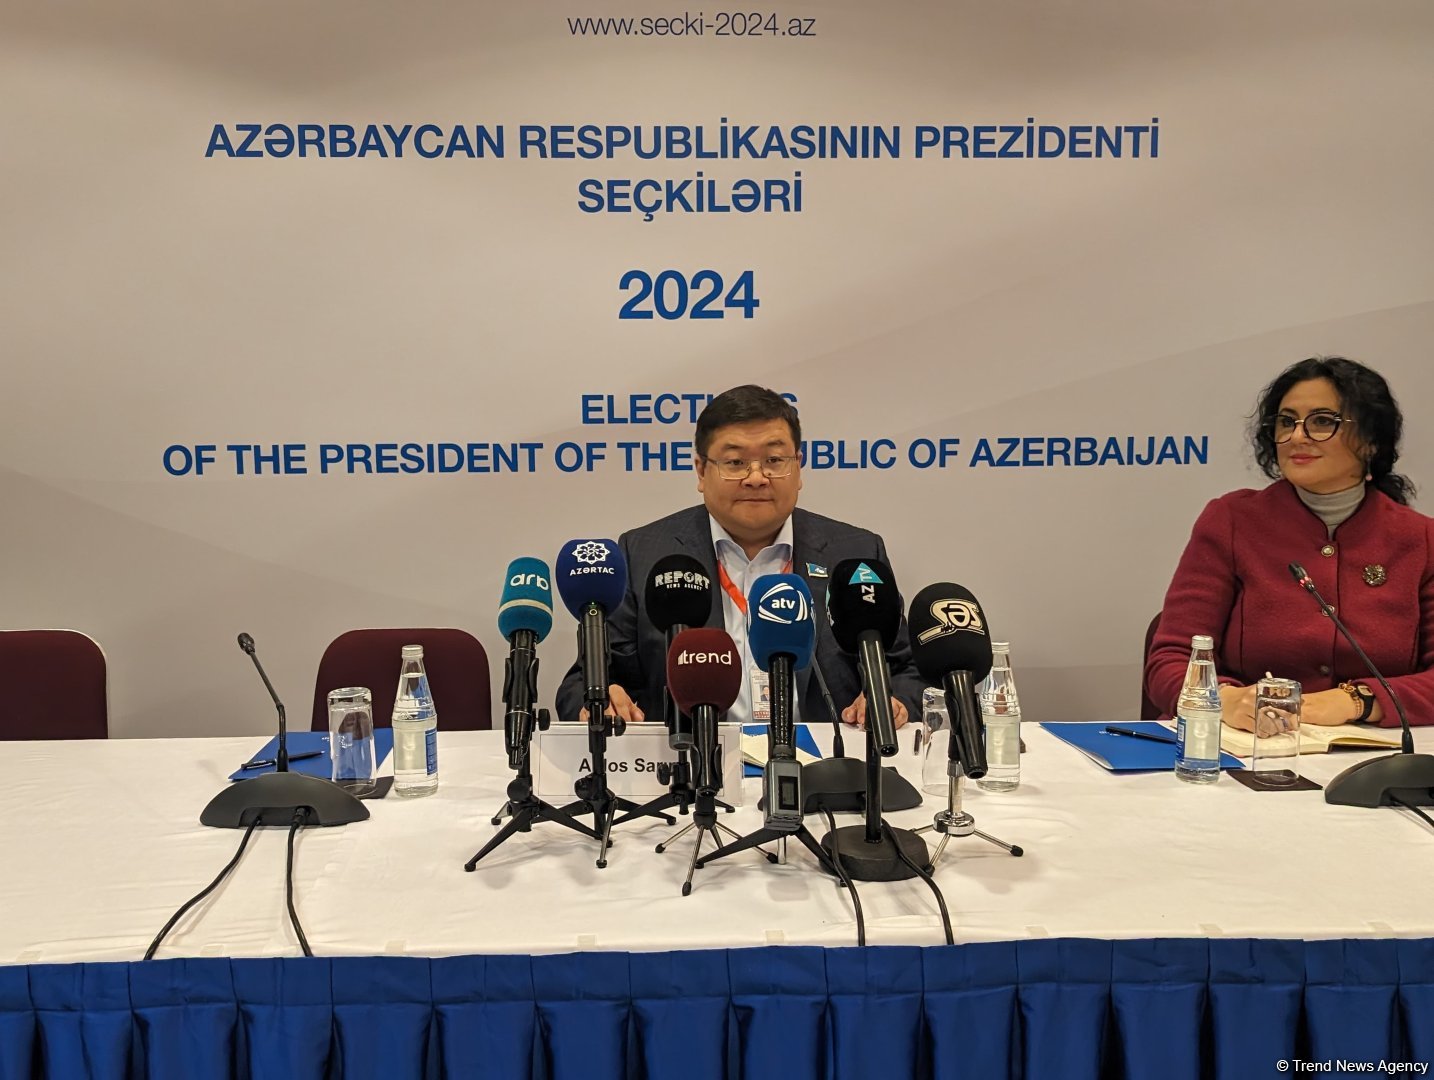 Voters enthusiastically cast ballots in presidential election in Azerbaijan - Kazakh MP